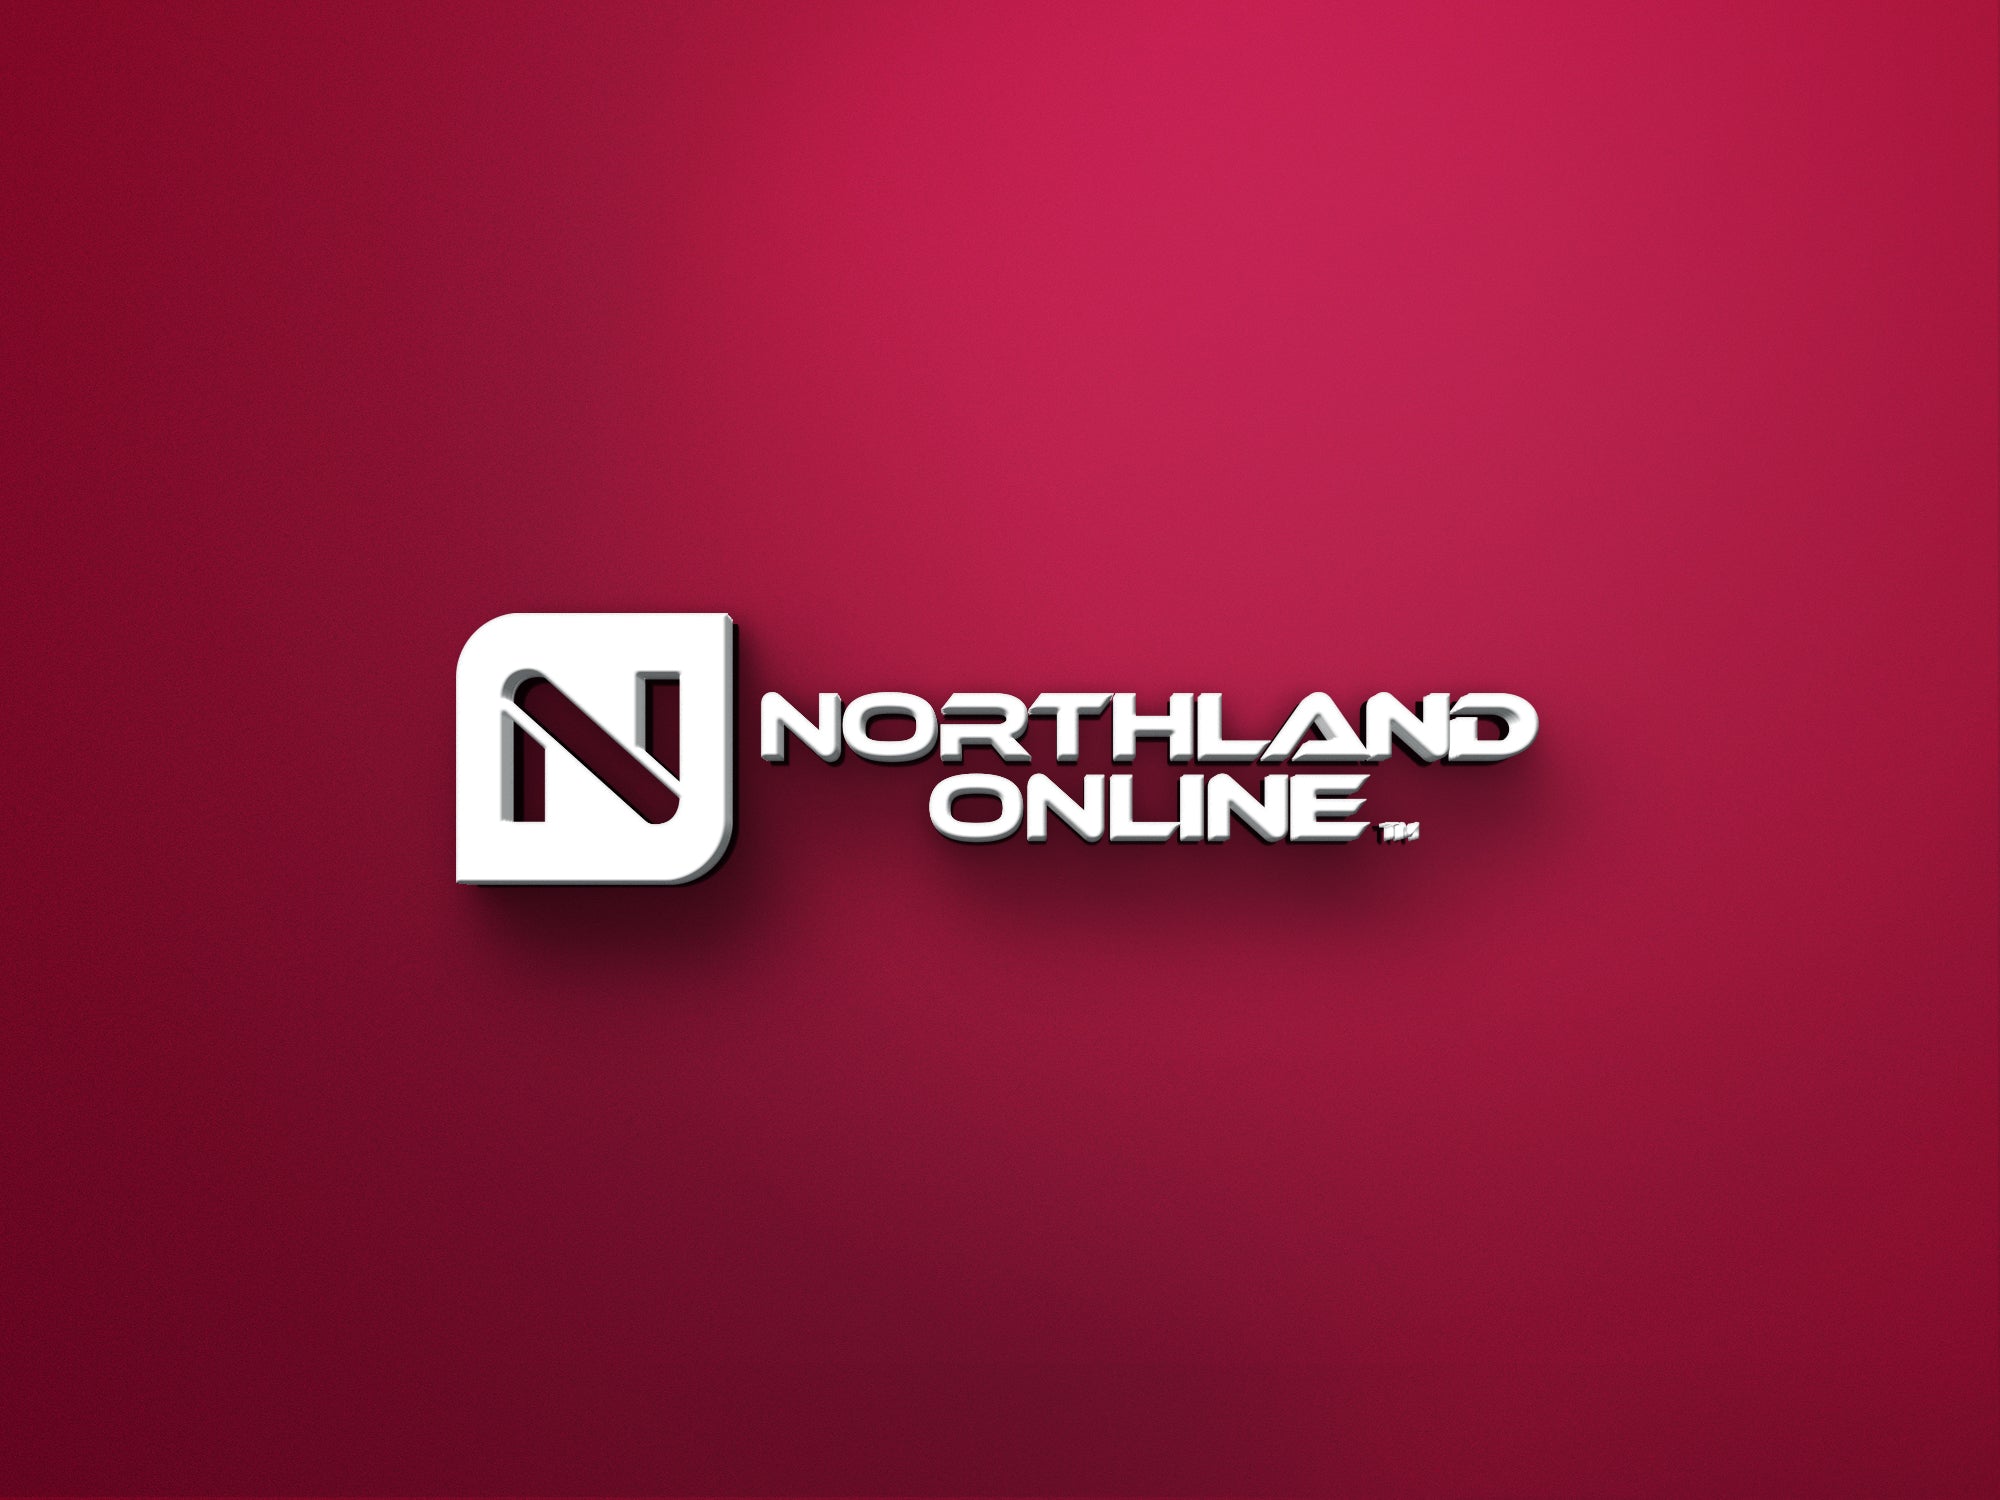 Northland Online - All Products Made in USA